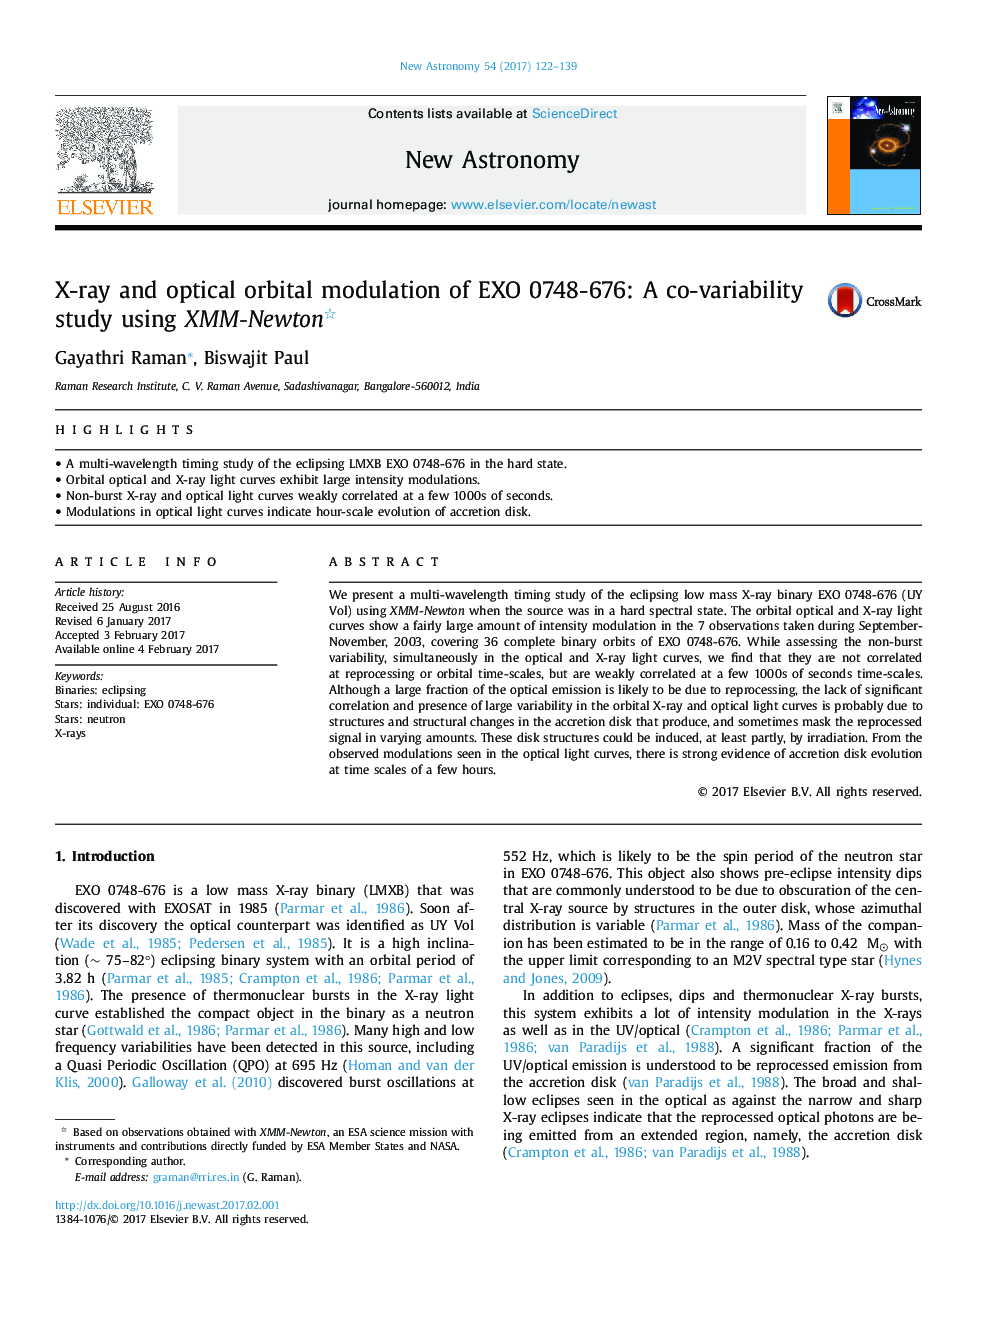 X-ray and optical orbital modulation of EXO 0748-676: A co-variability study using XMM-Newton